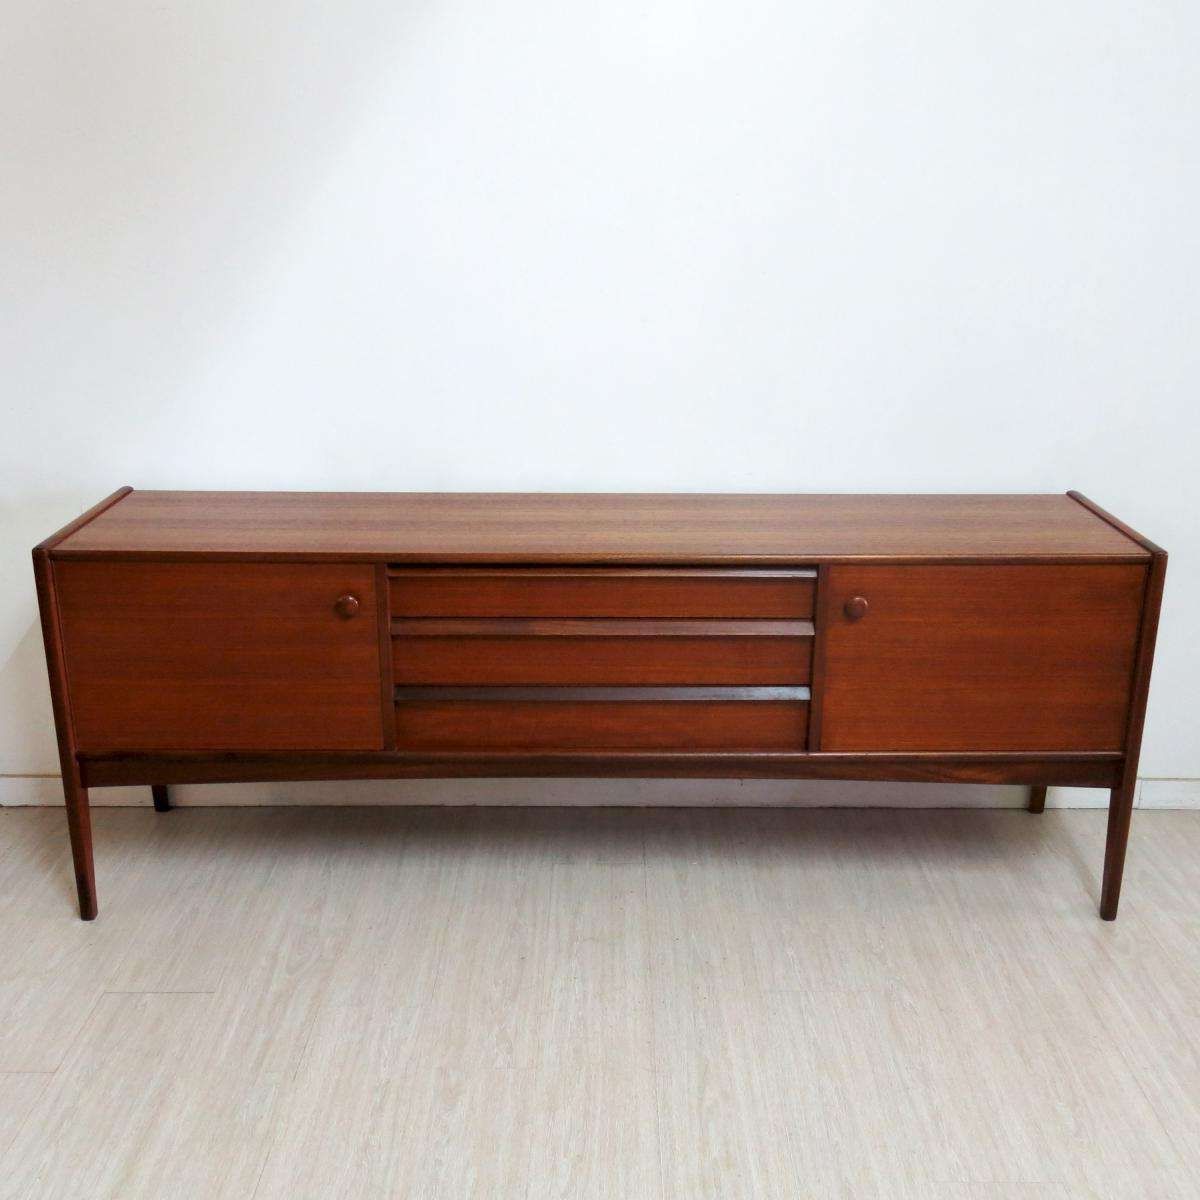 Vintage British Silva Sideboardjohn Herbert For Younger, 1960s With Regard To A Younger Sideboards (View 18 of 20)